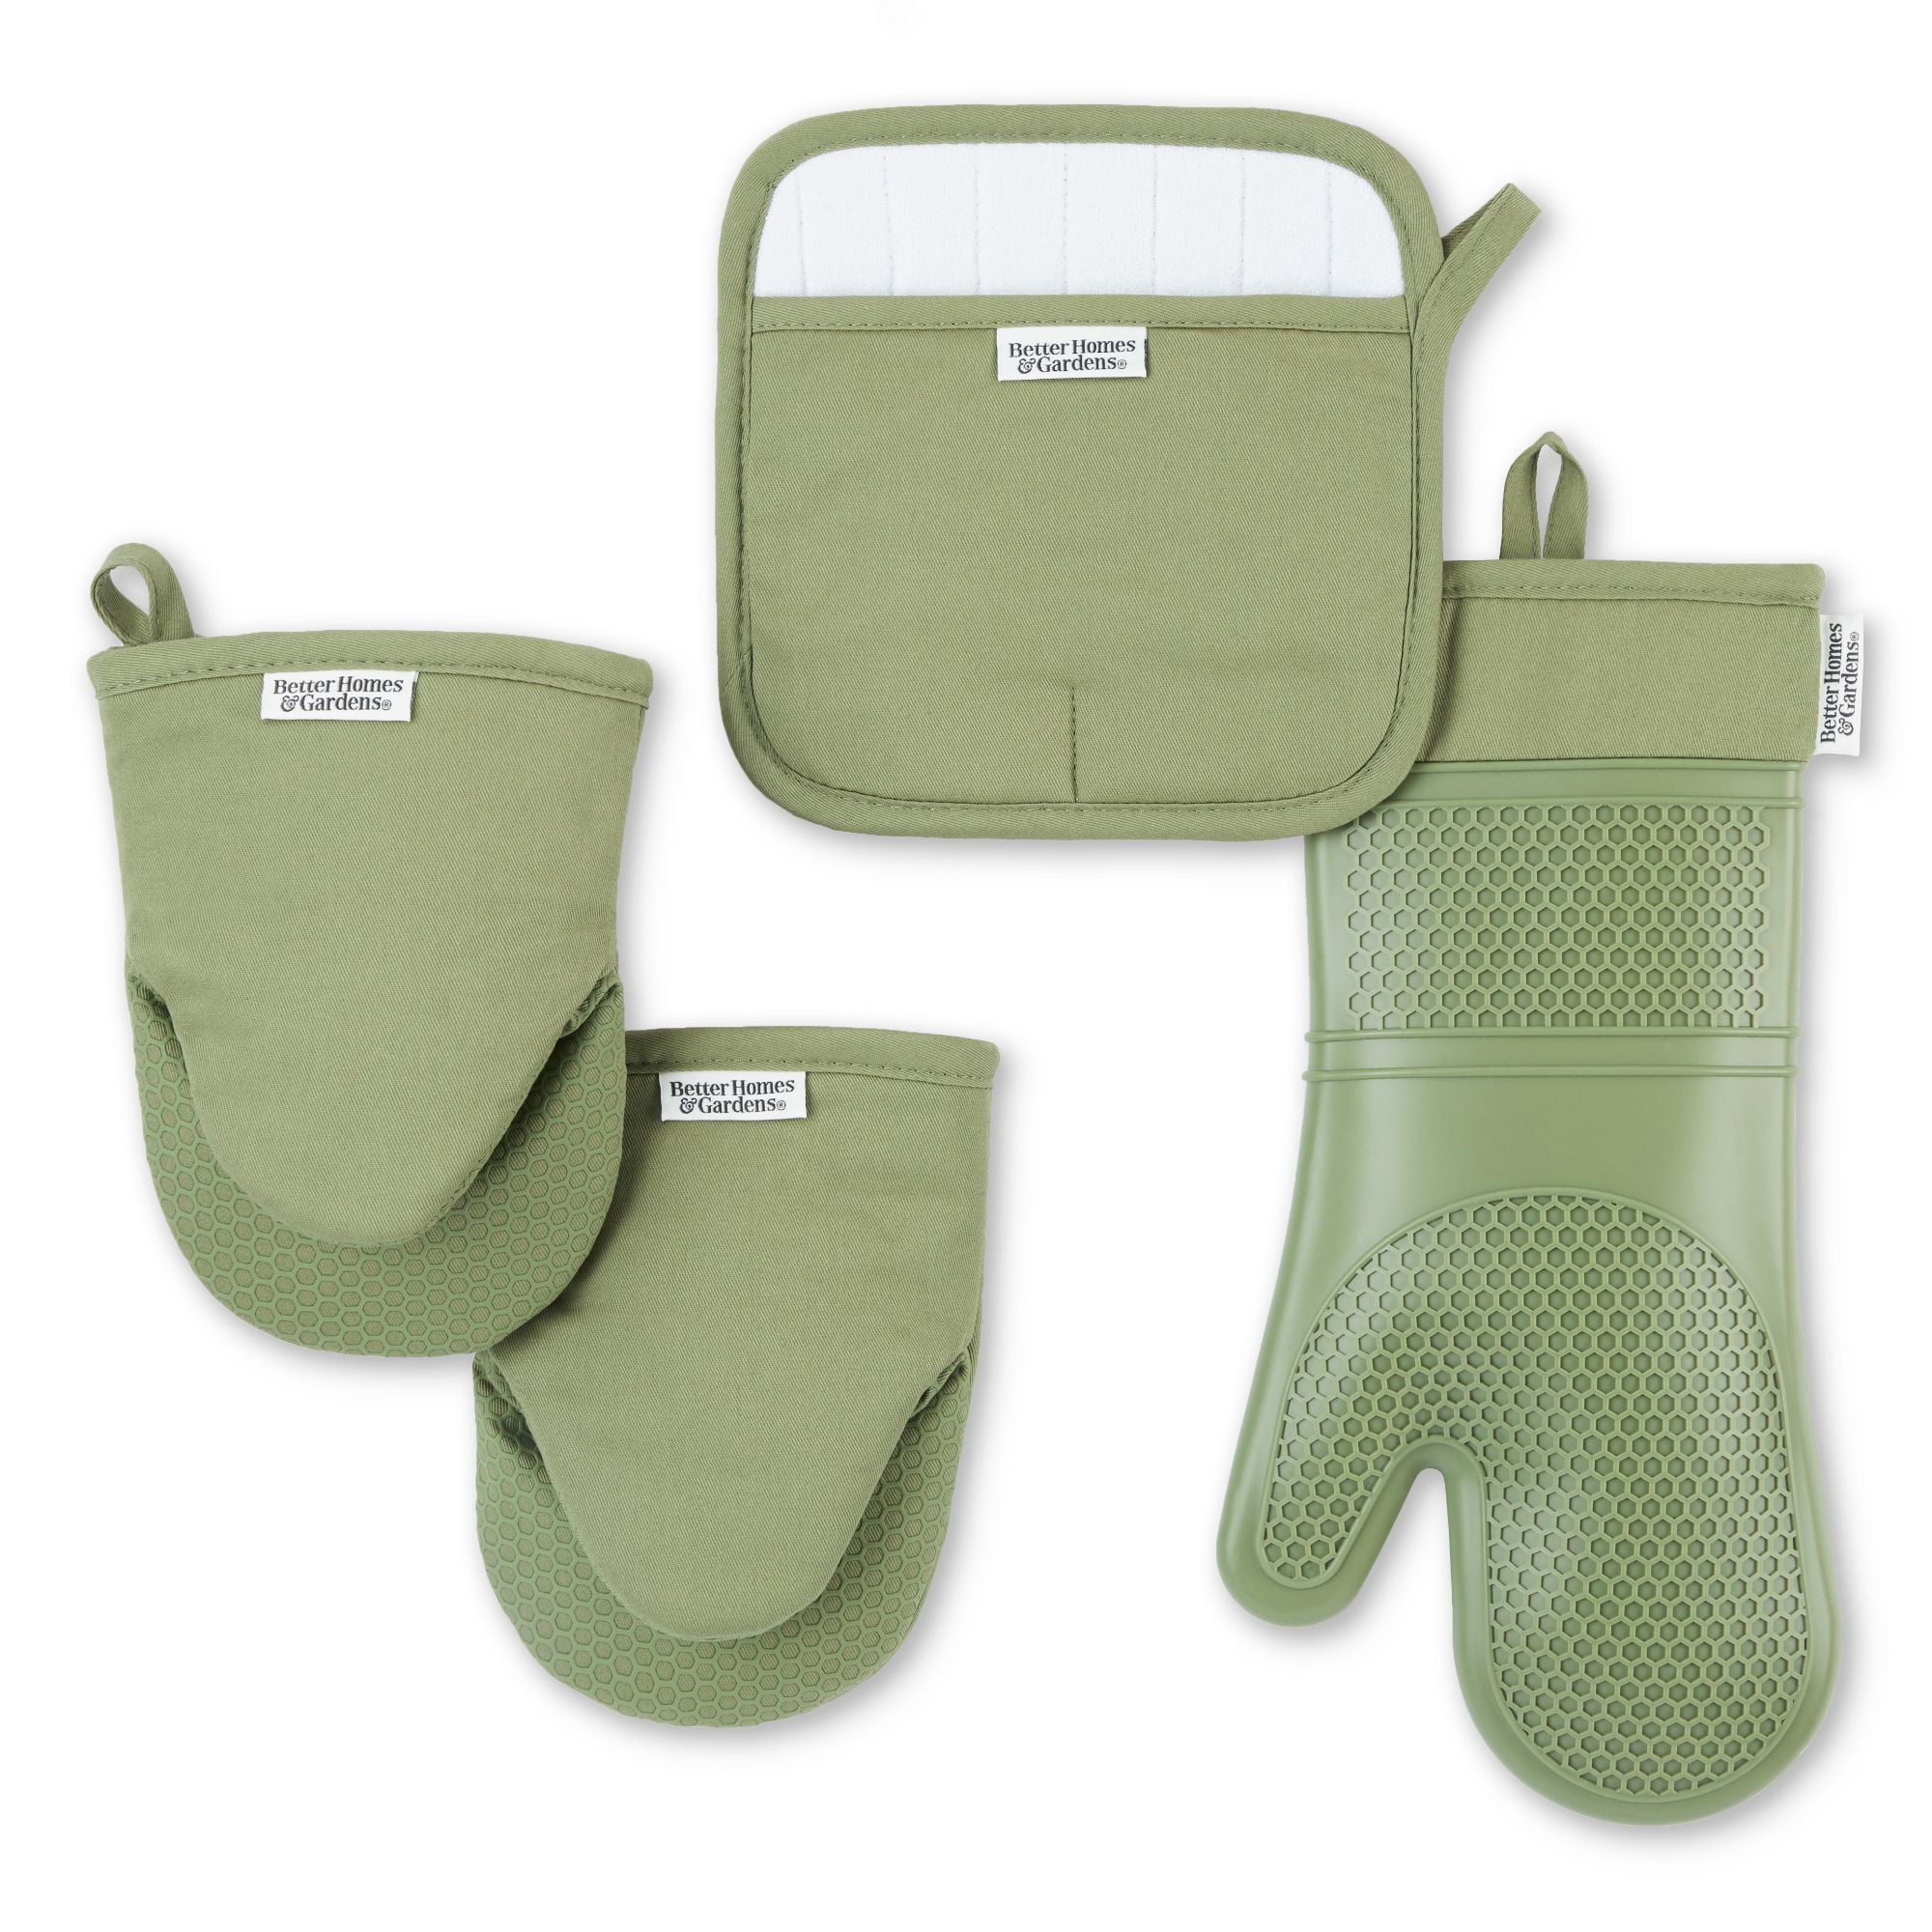 Dunroven House Quilted Oven Mitt and Potholder Set - Bed Bath & Beyond -  28173109